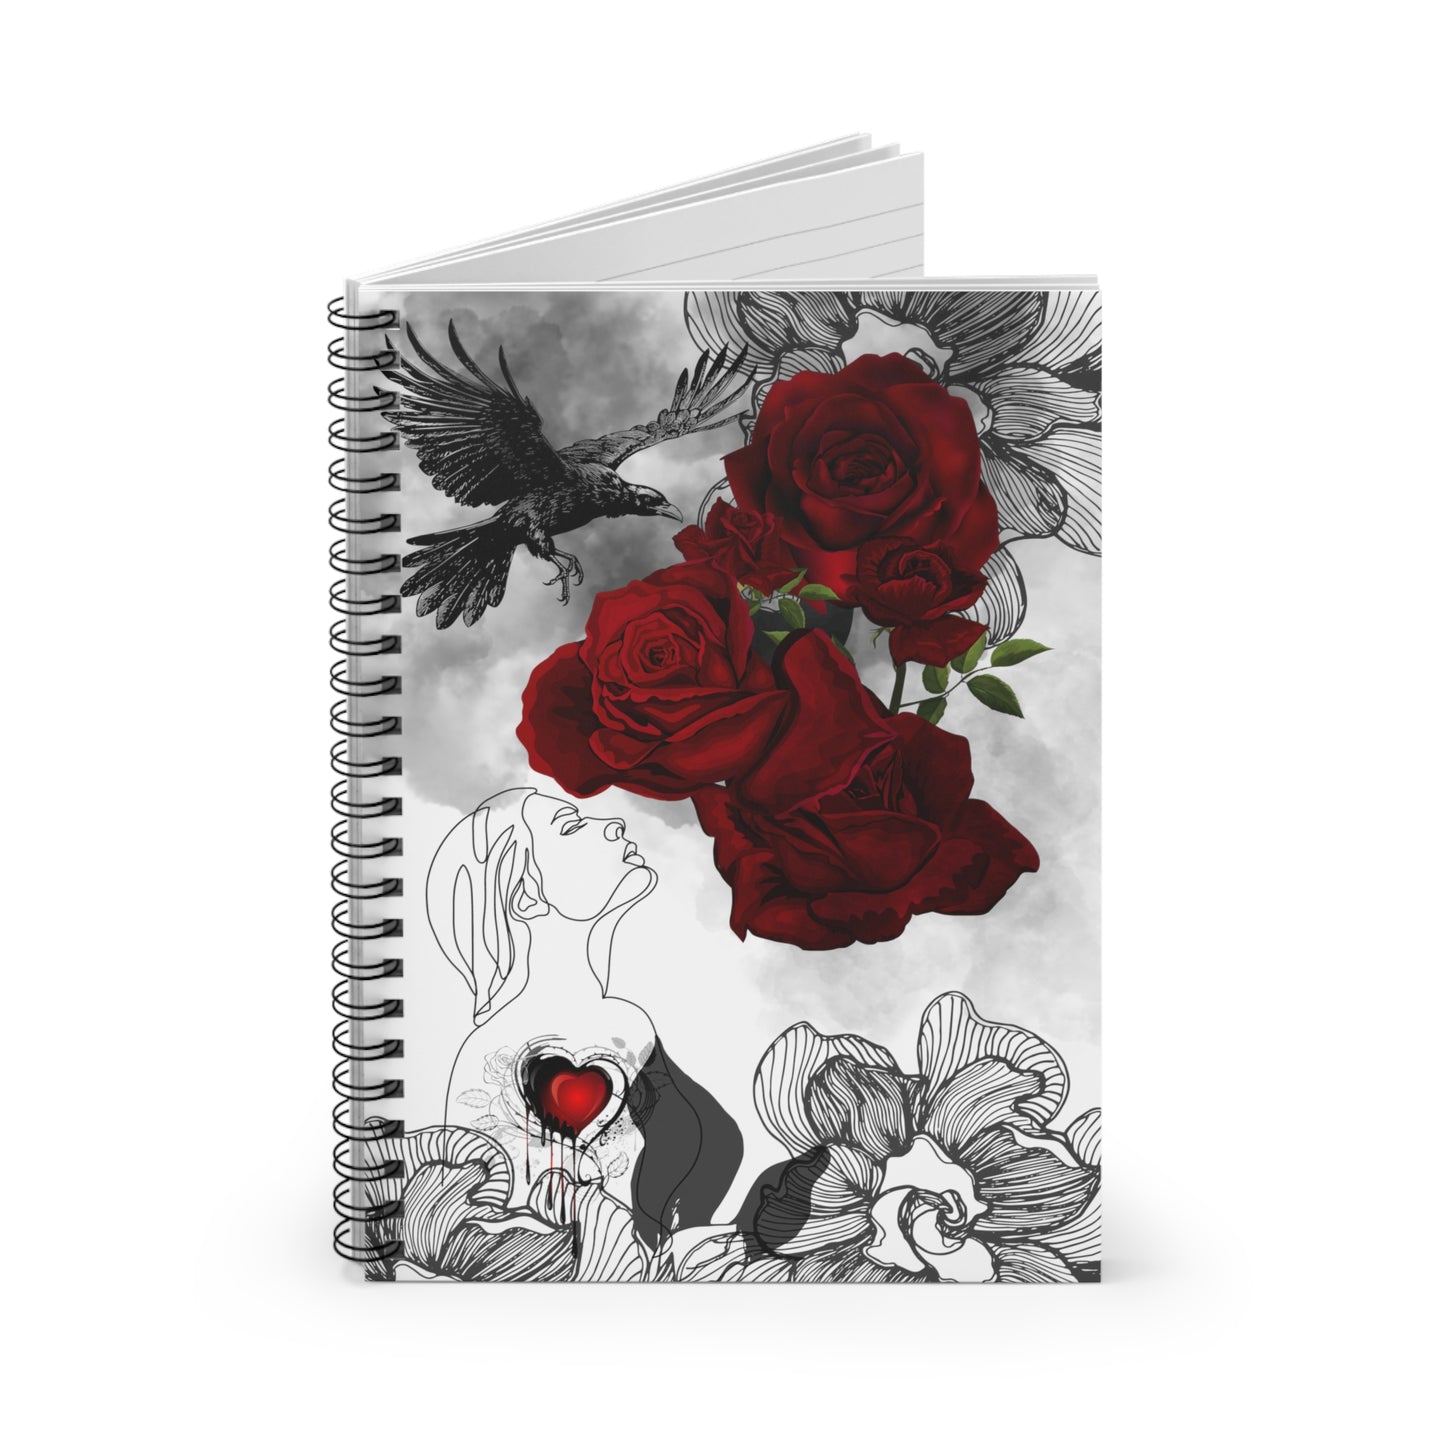 Wounded Heart: Spiral Notebook - Log Books - Journals - Diaries - and More Custom Printed by TheGlassyLass